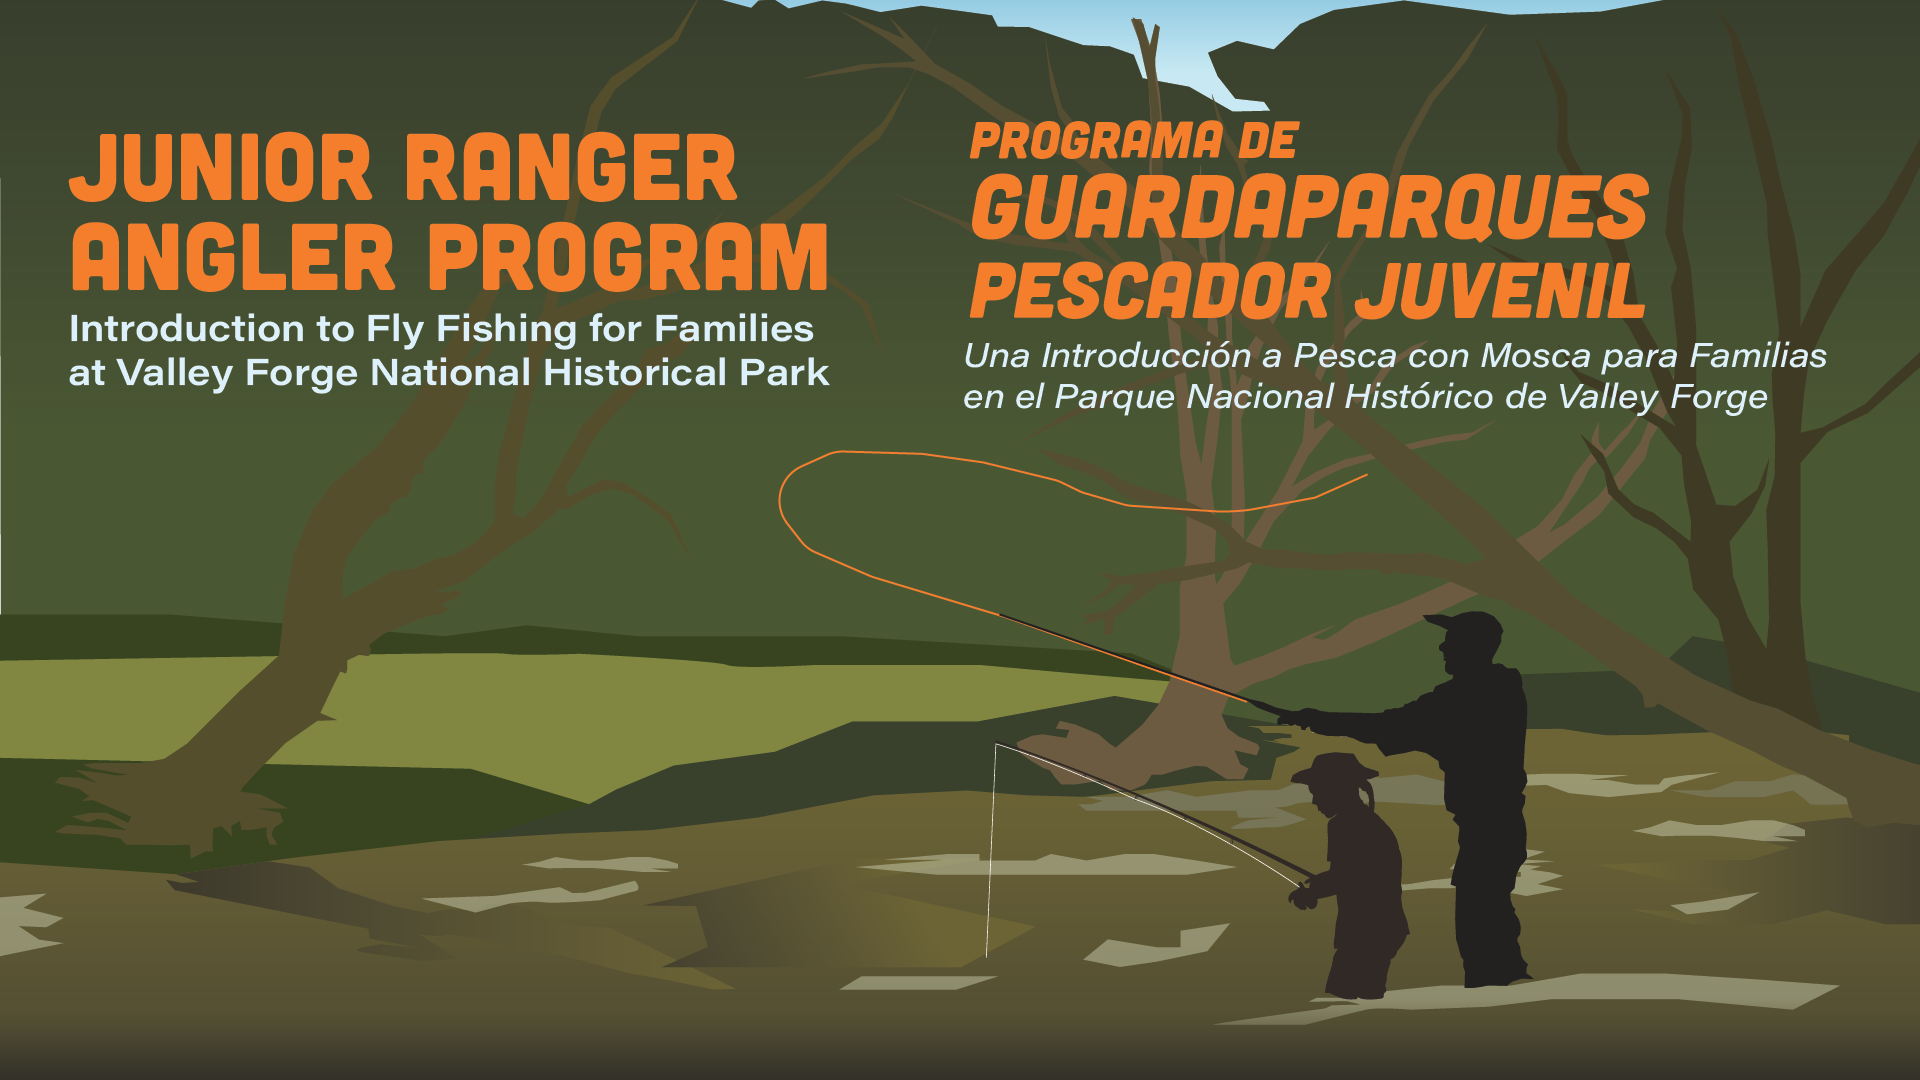 An illustration of an adult and a child in silhouette holding fishing rods. They stand in a creek with trees on the banks. Text reads Junior Ranger Angler Program, Introduction to Fly Fishing for Families at Valley Forge National Historical Park